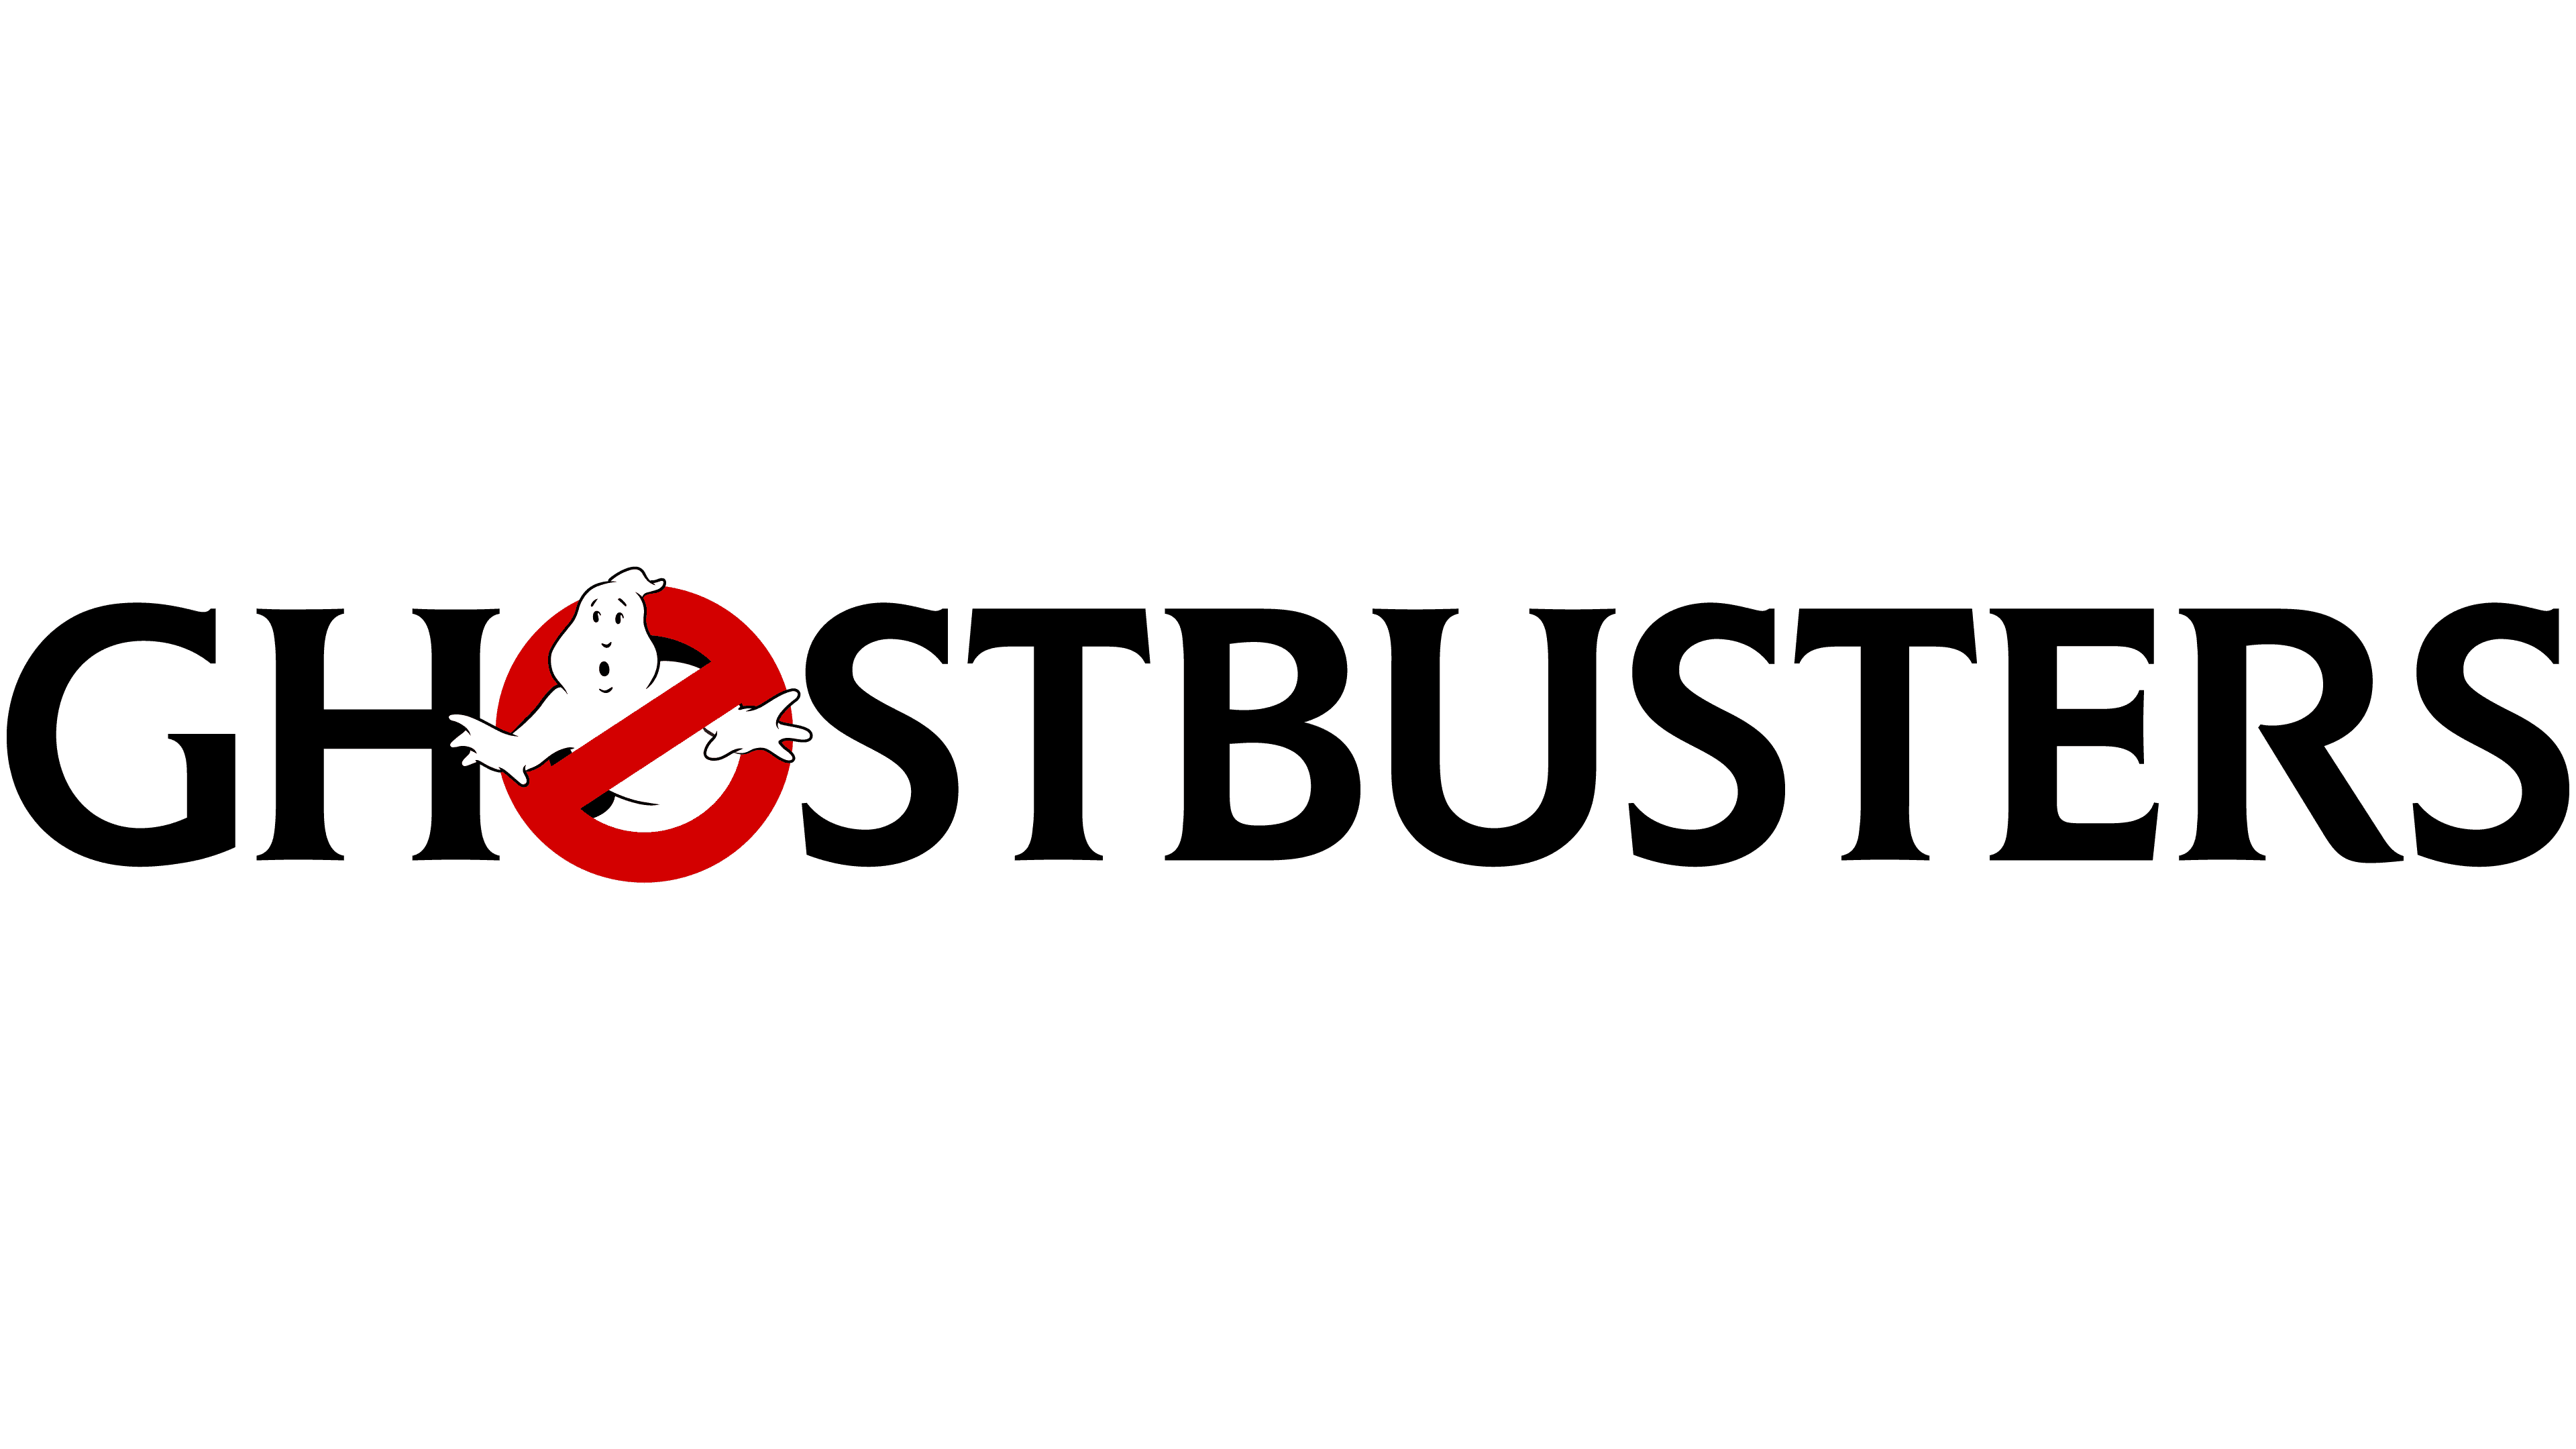 Iconic Ghostbusters logo gets fan reimagining in celebration of upcoming  sequel - Ghostbusters News